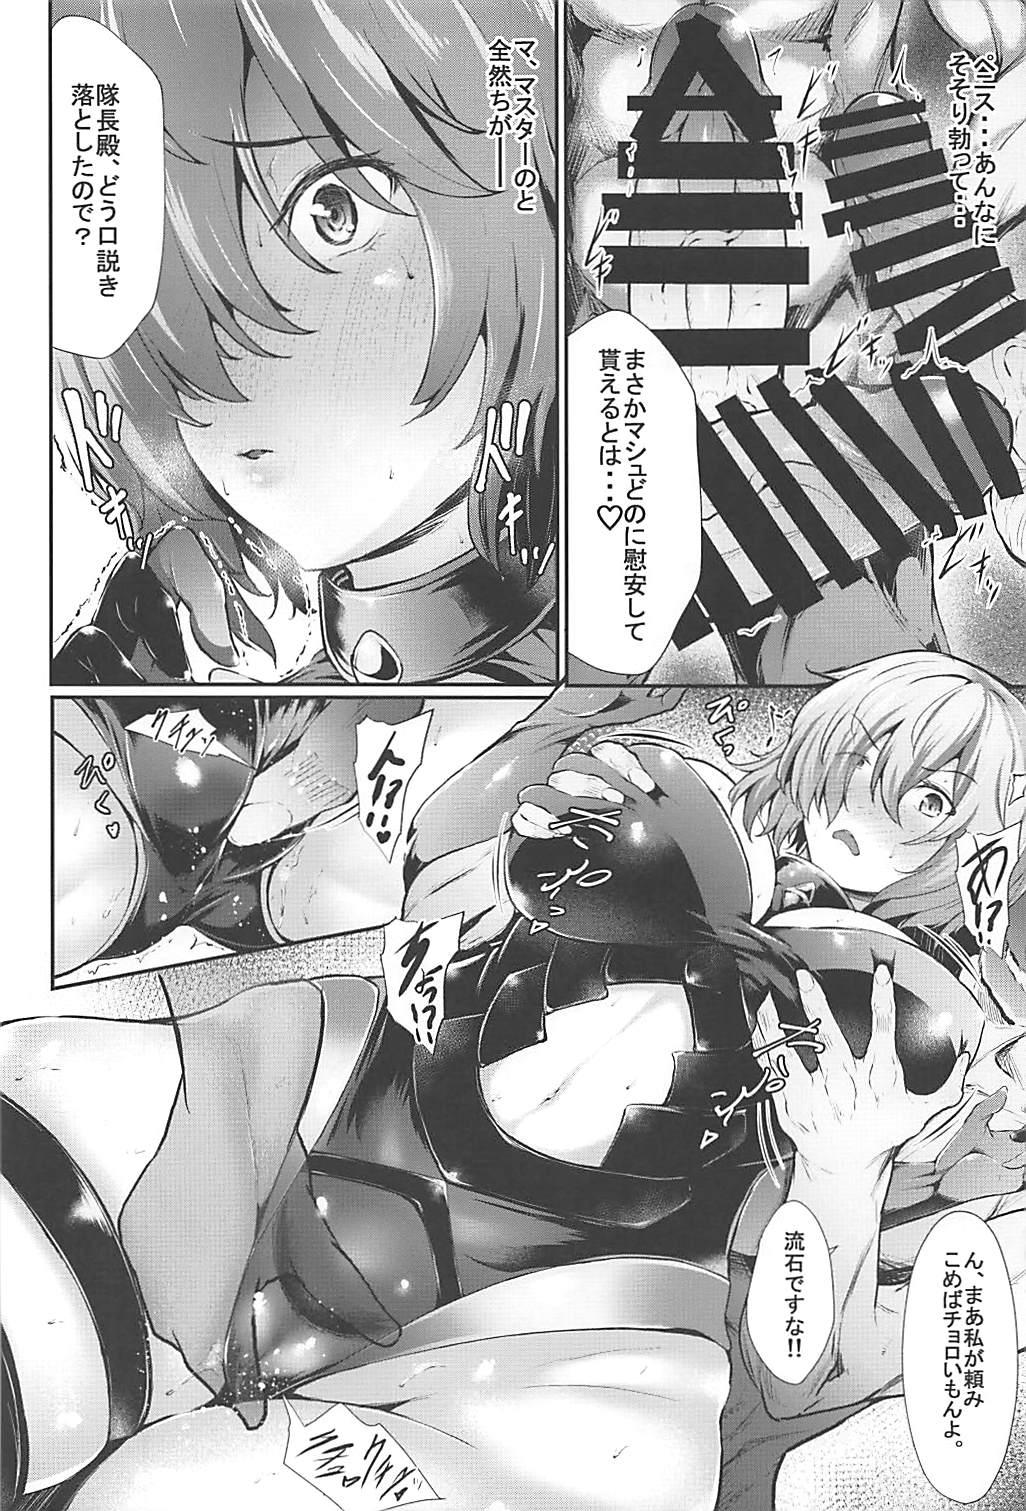 Mom Nympho-mania? - Fate grand order Girls Getting Fucked - Page 5